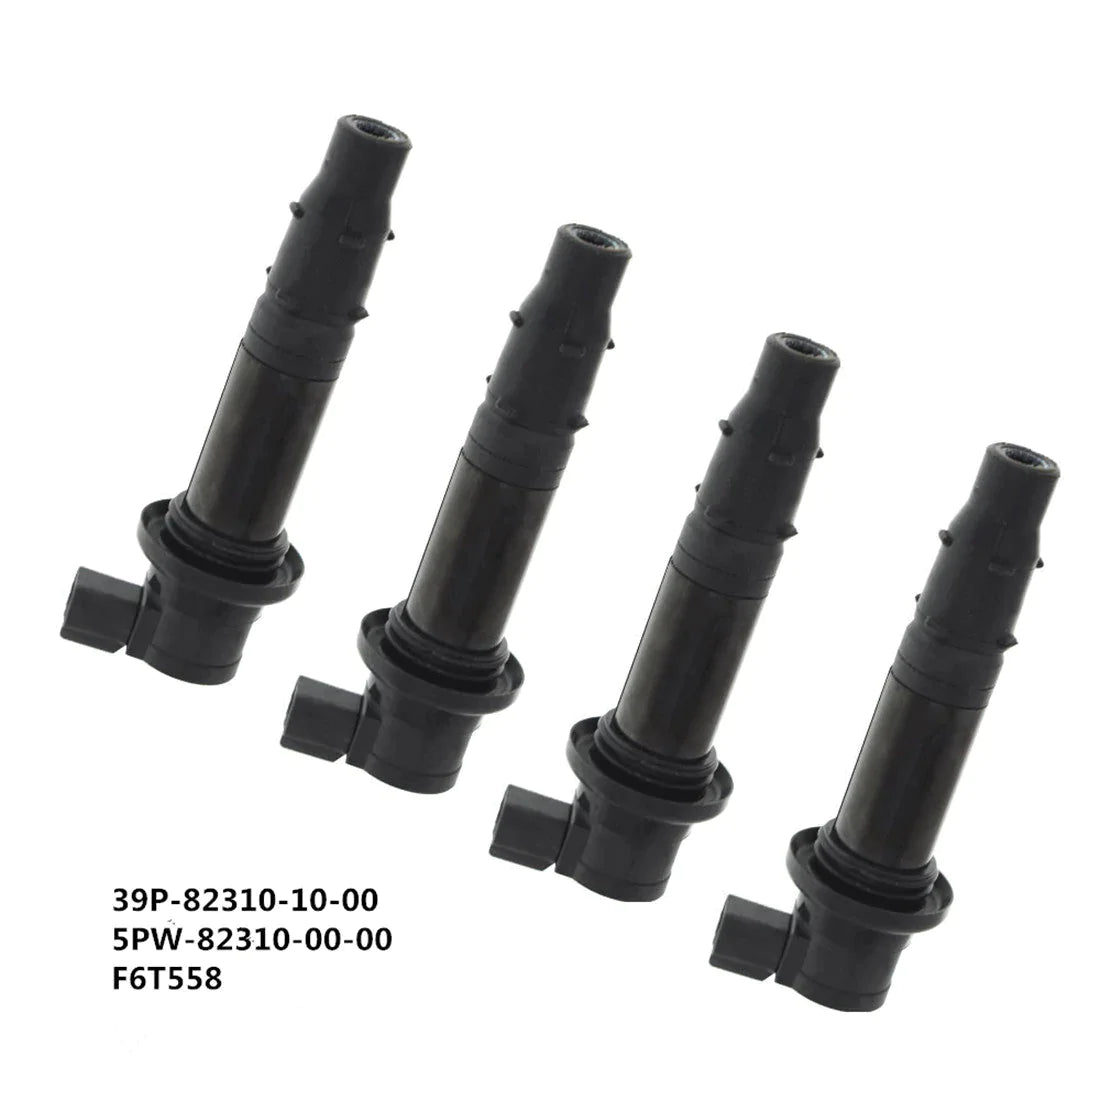 Labwork Set of 4 Ignition Coils 39P-82310-10-00 5PW-82310-00-00 F6T558 Replacement for Yamaha R1 YZF-R1 MT-07 1WS FZ8 R6 RJ15 Bj Engine LAB WORK MOTO